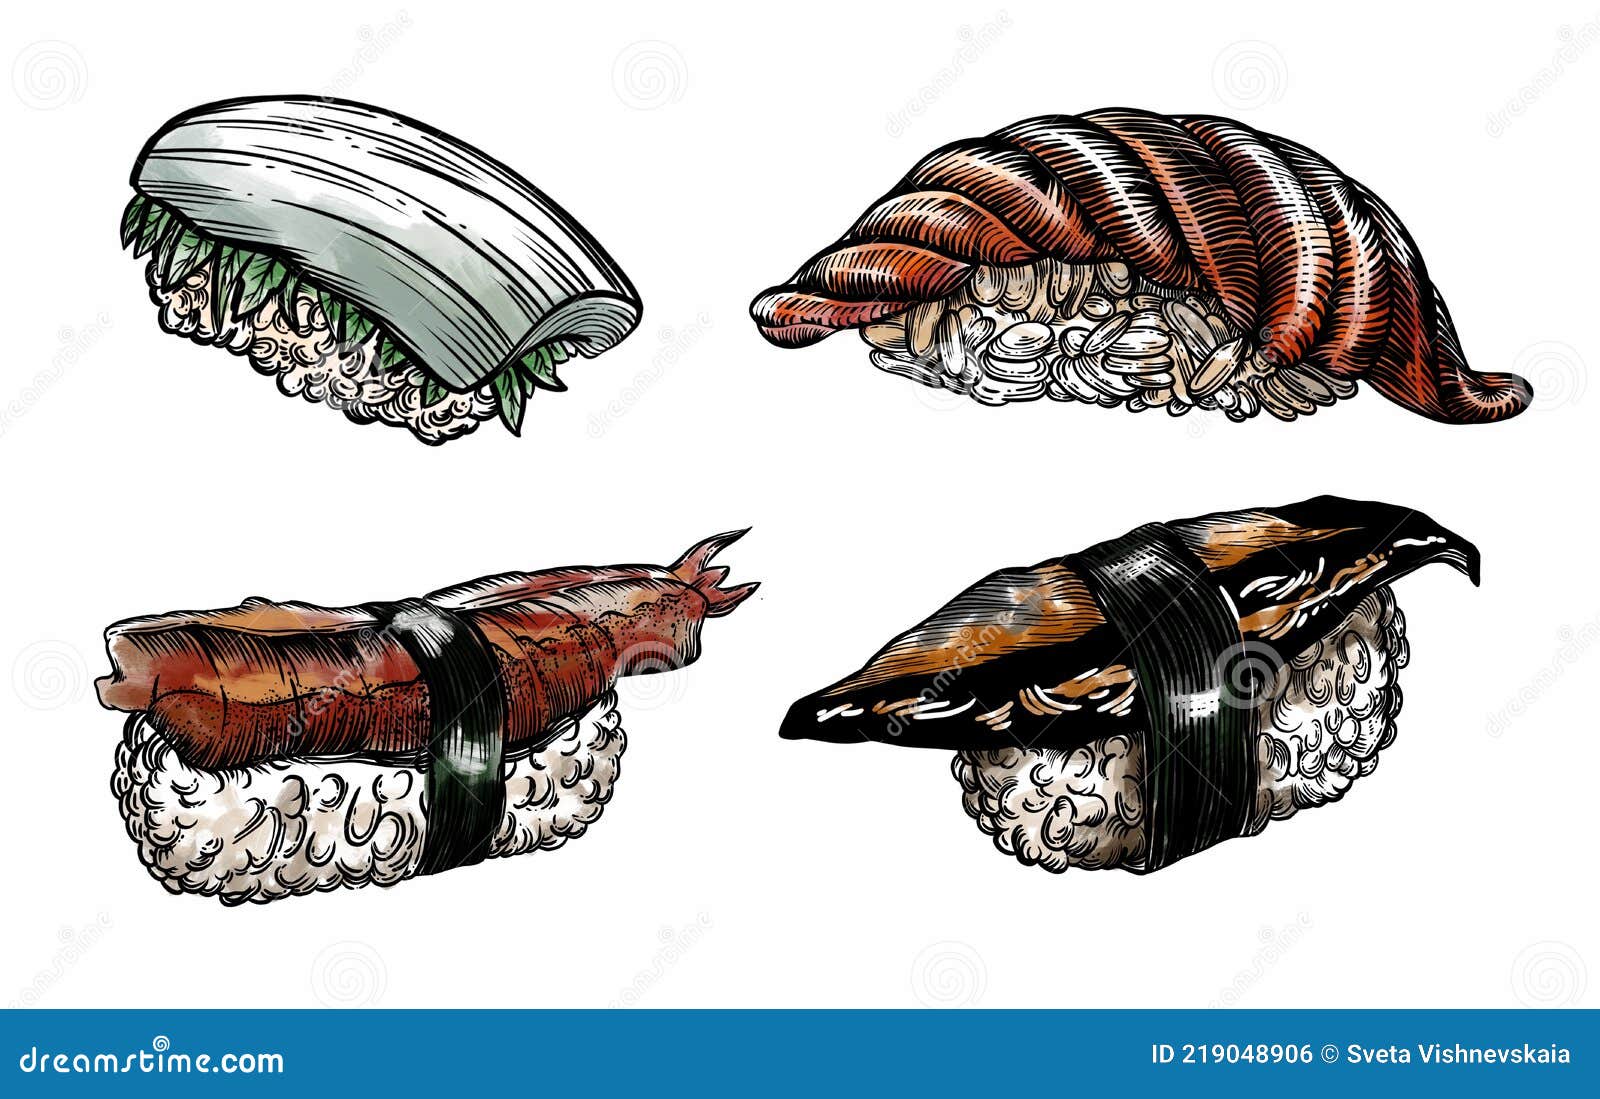 Raster Illustration of Rolls, Sushi and Seafood in the Sketch Style ...